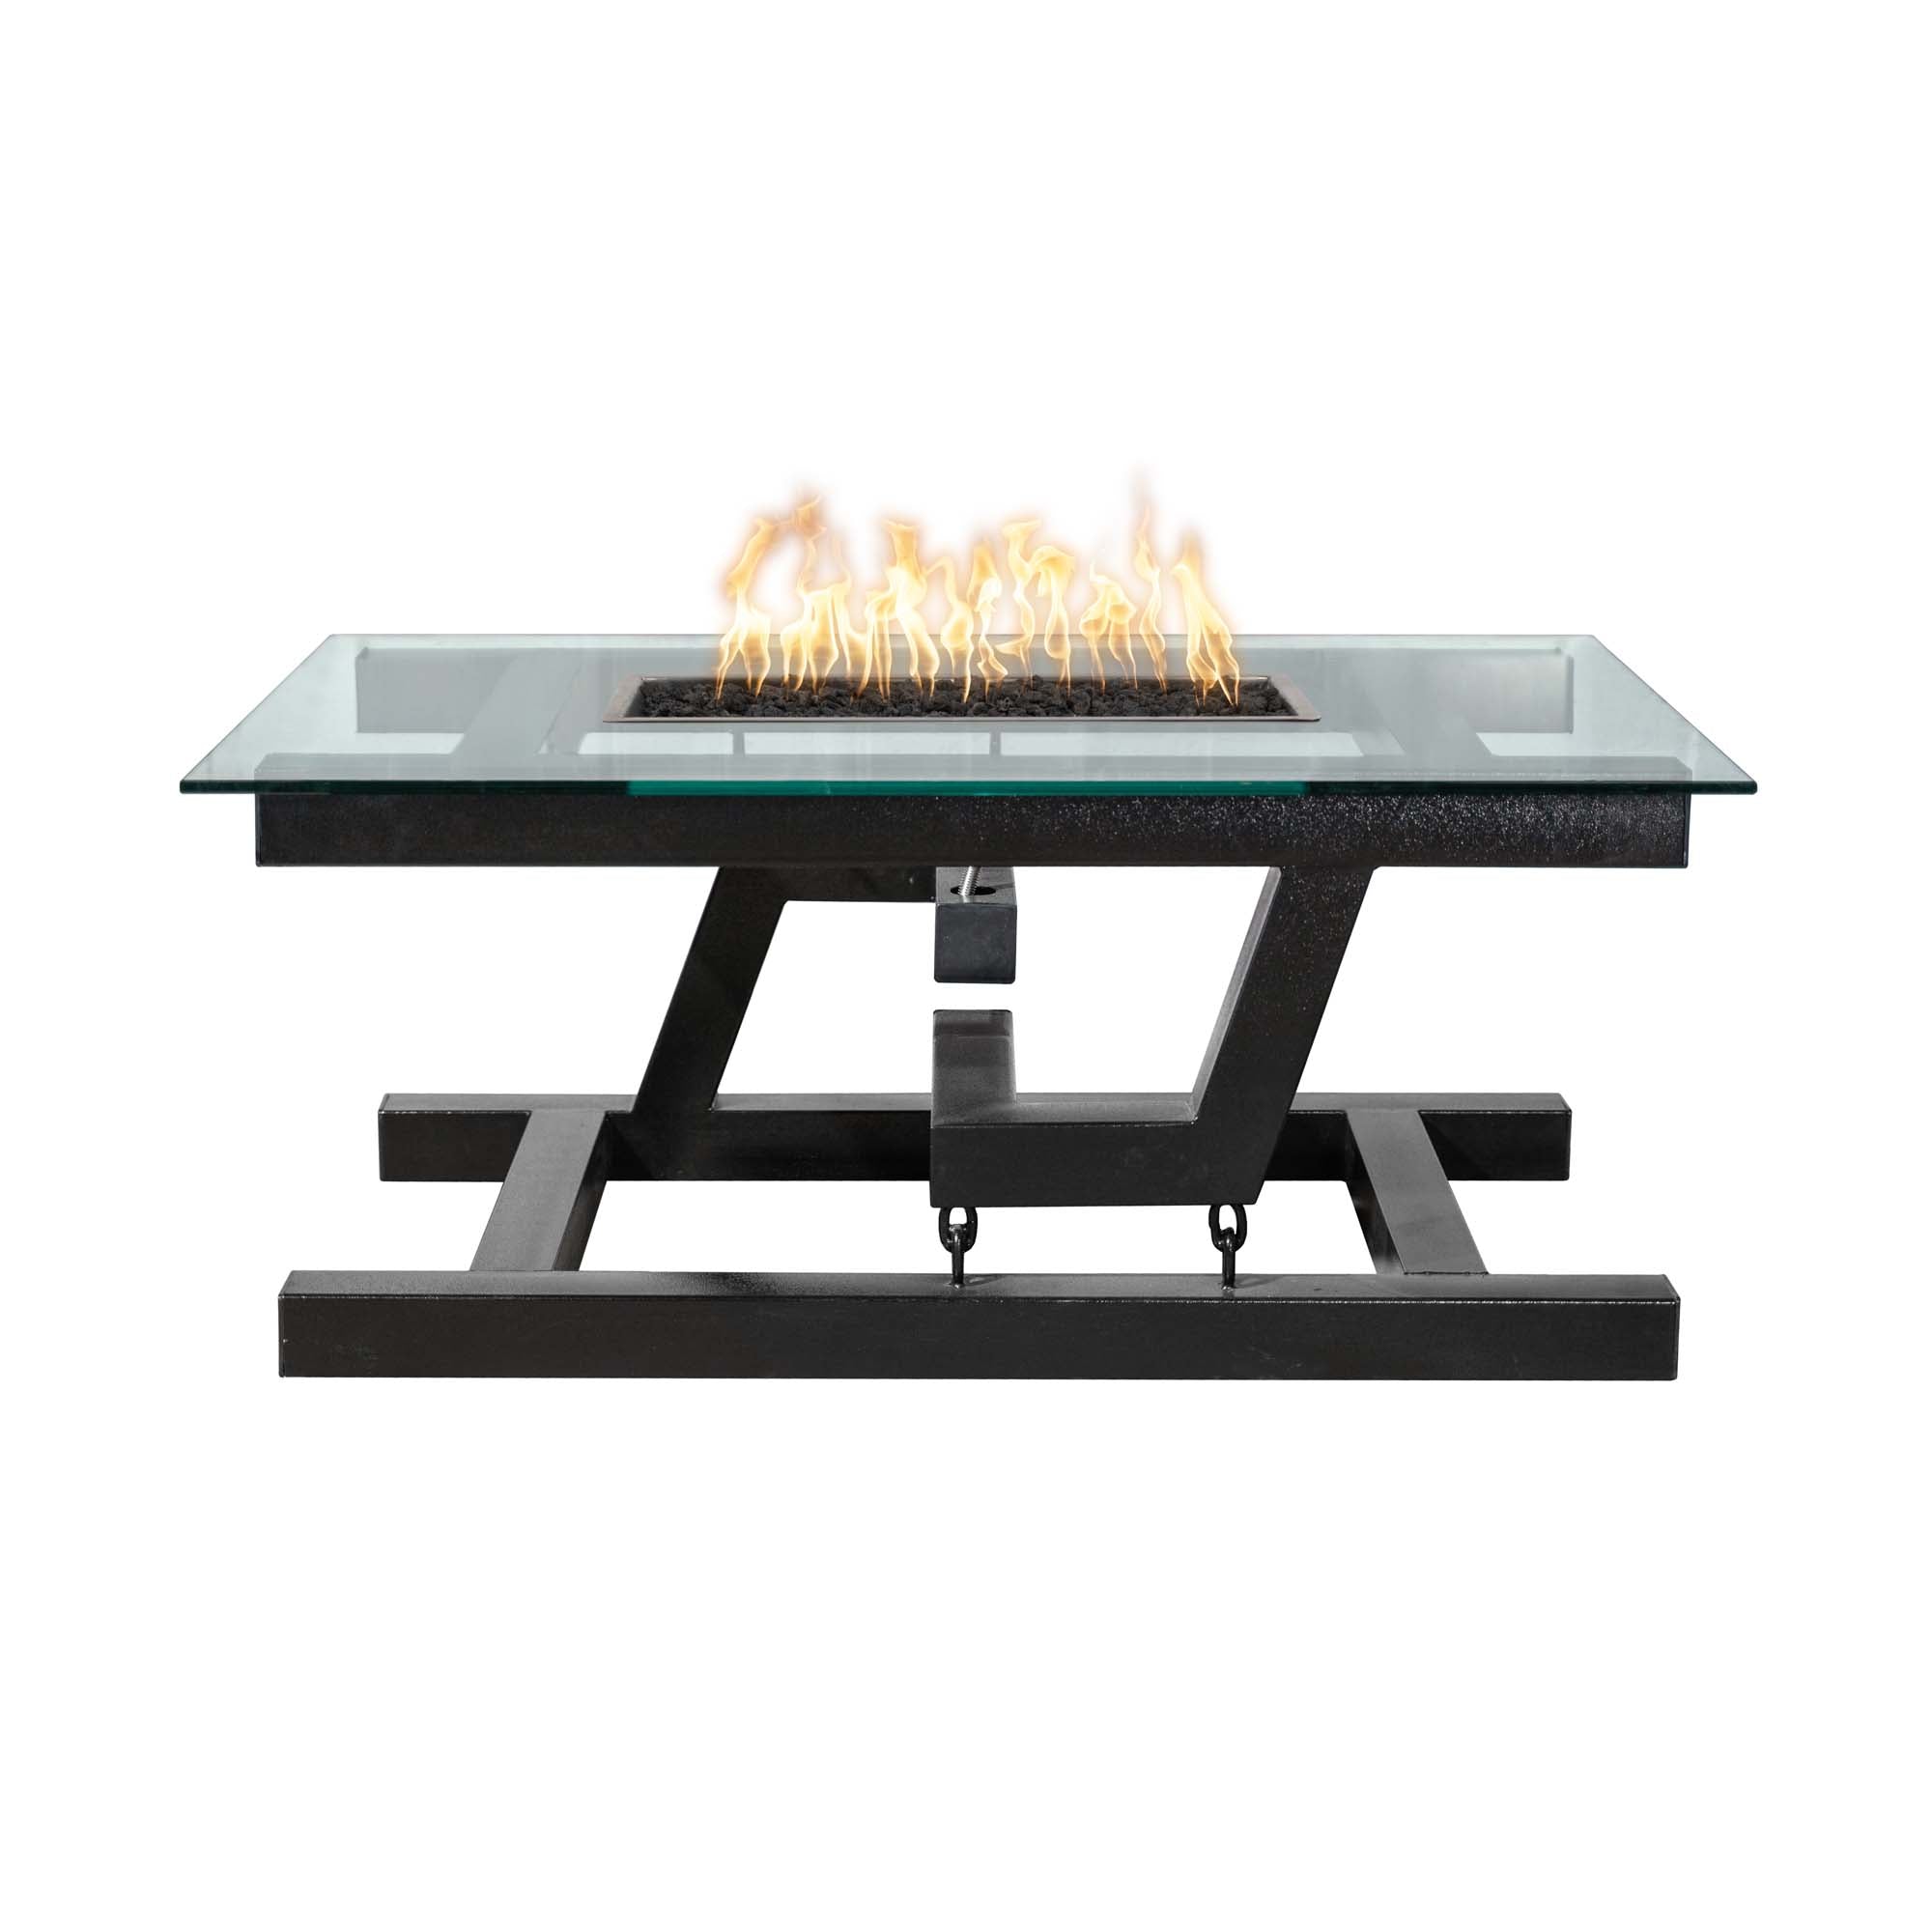 The Outdoor Plus Newton Powder Coated Fire Pit – Floating Appearance